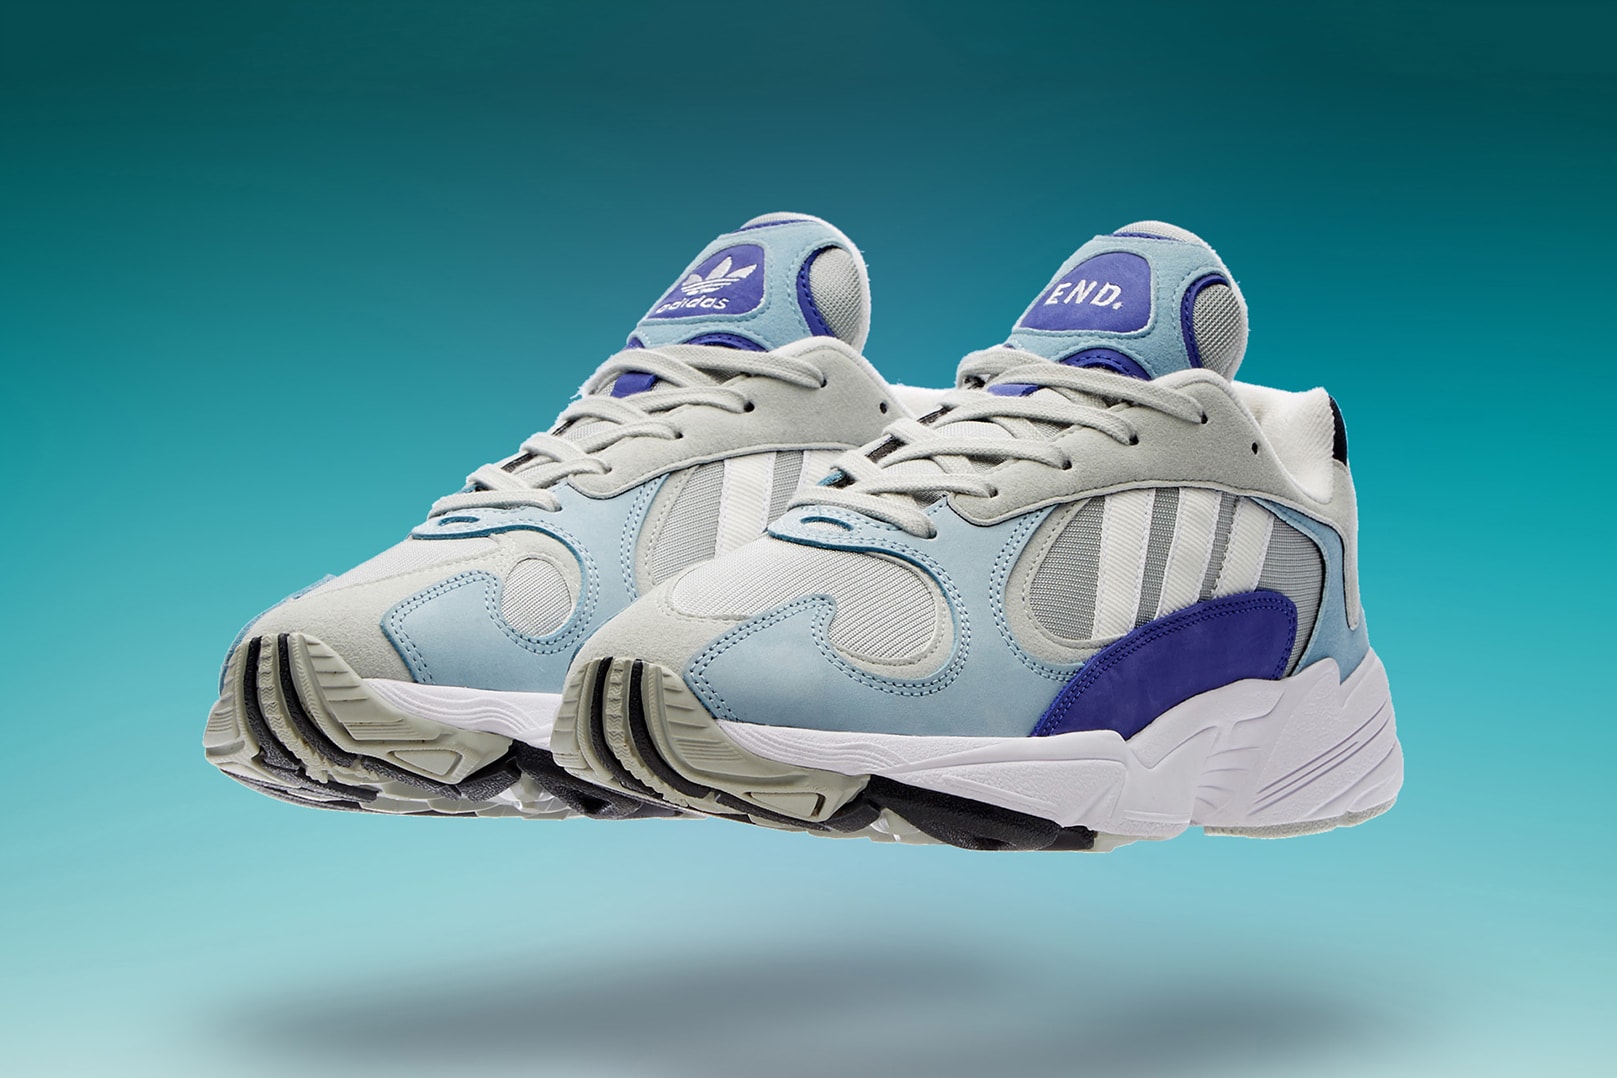 END. Clothing adidas Yung-1 Atmosphere Release Info Grey Blue Purple Chunky Runner 1990s Falcon Dorf Sneaker Trainer Shoe Details Cop Buy Purchase Register Raffle